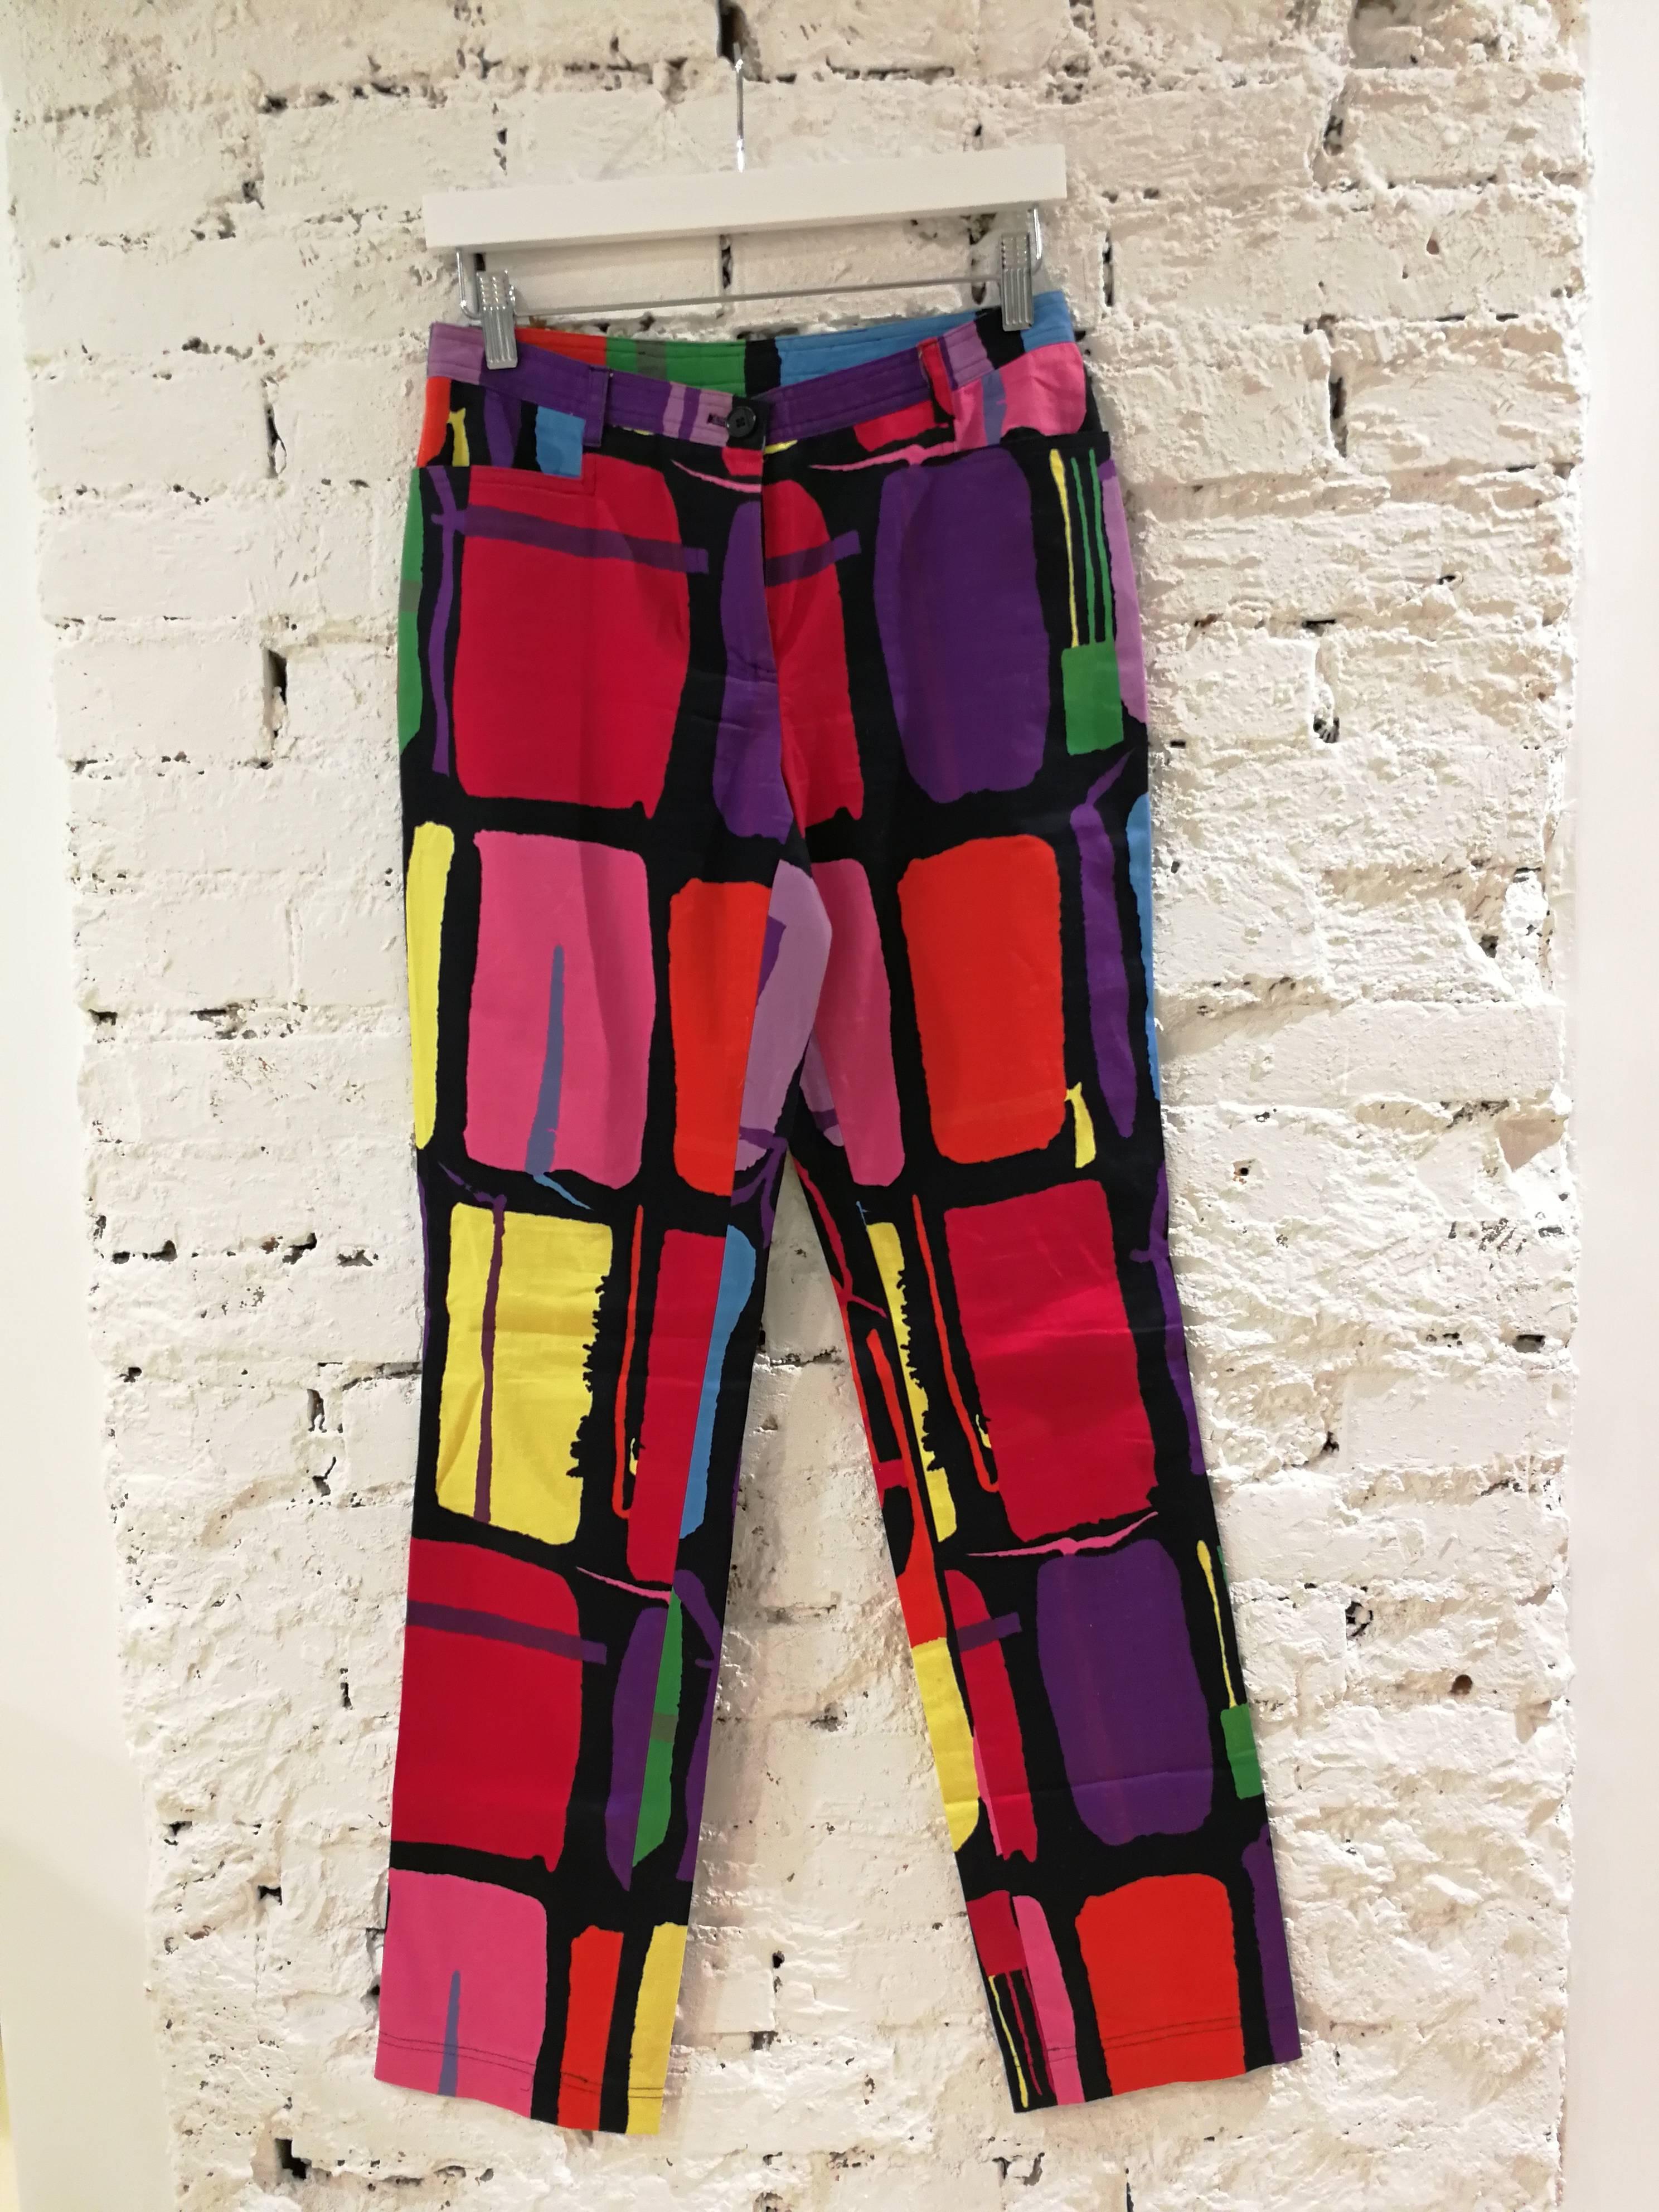 Moschino Cheap & Chic multicoloured Trousers

totally made in italy 

composition: cotton

Italian size range 42